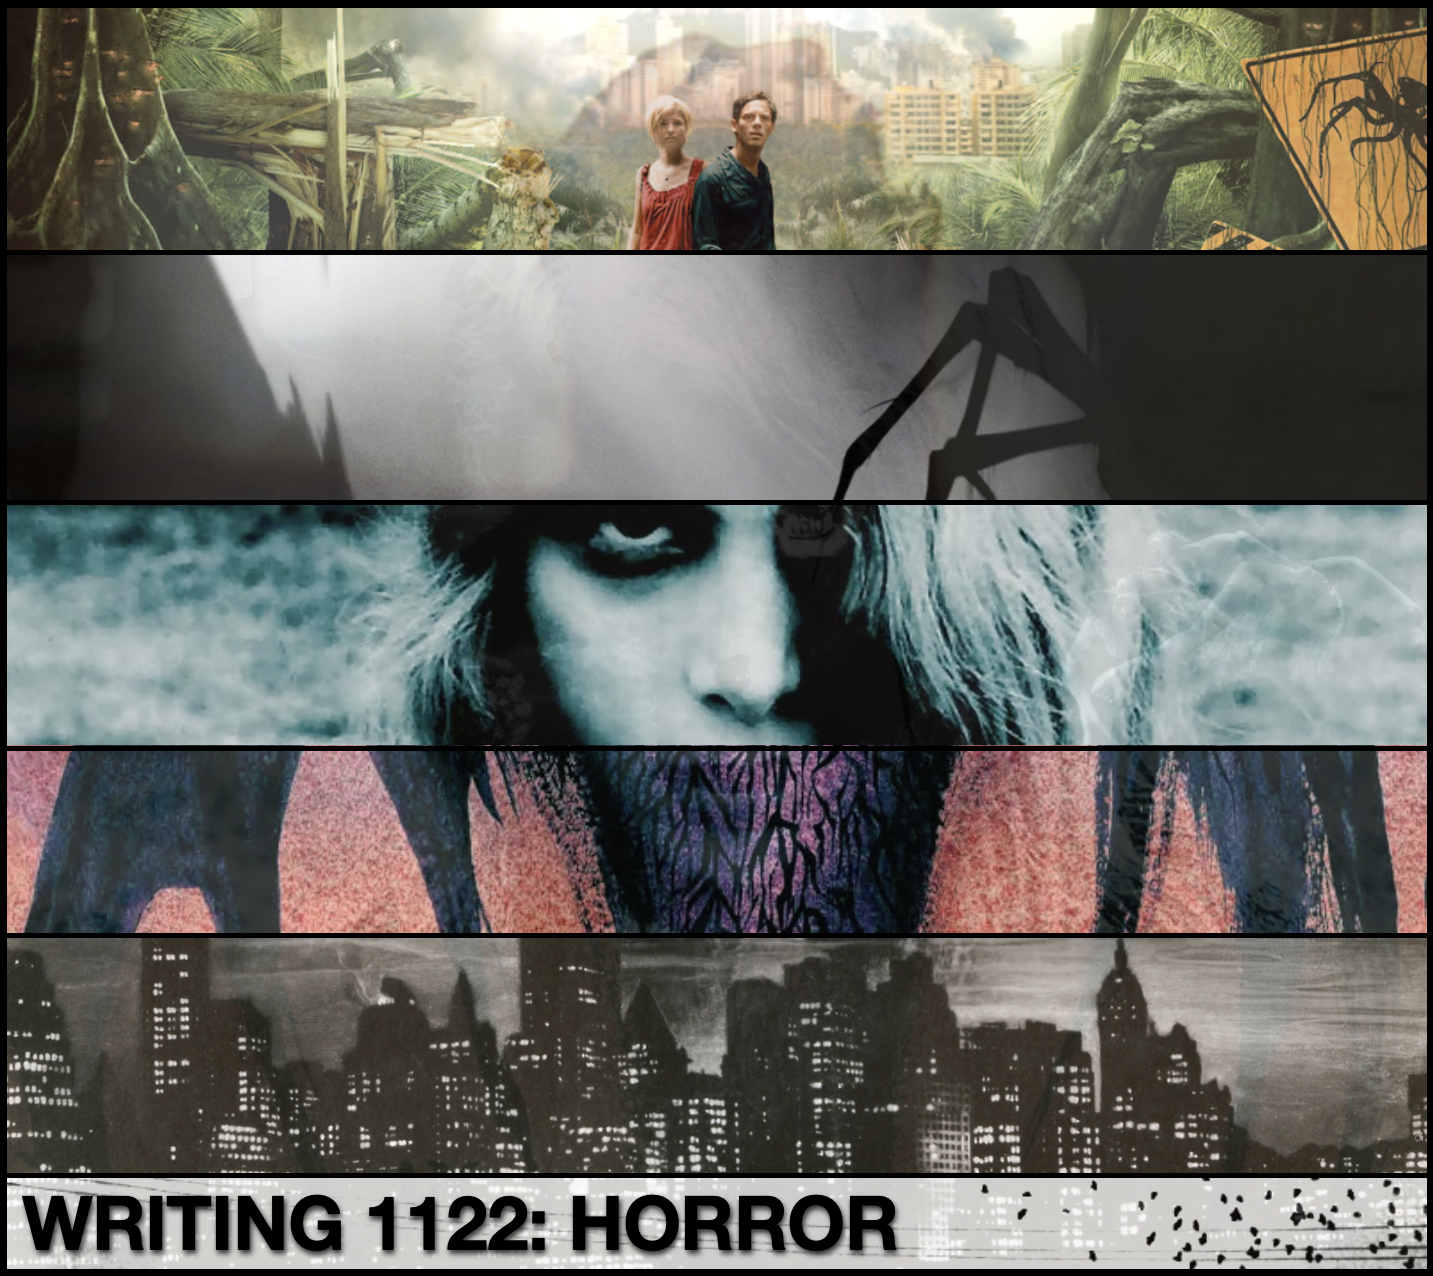 An amalgam of images from horror films with the words Writing 1122: Horror at the bottom.